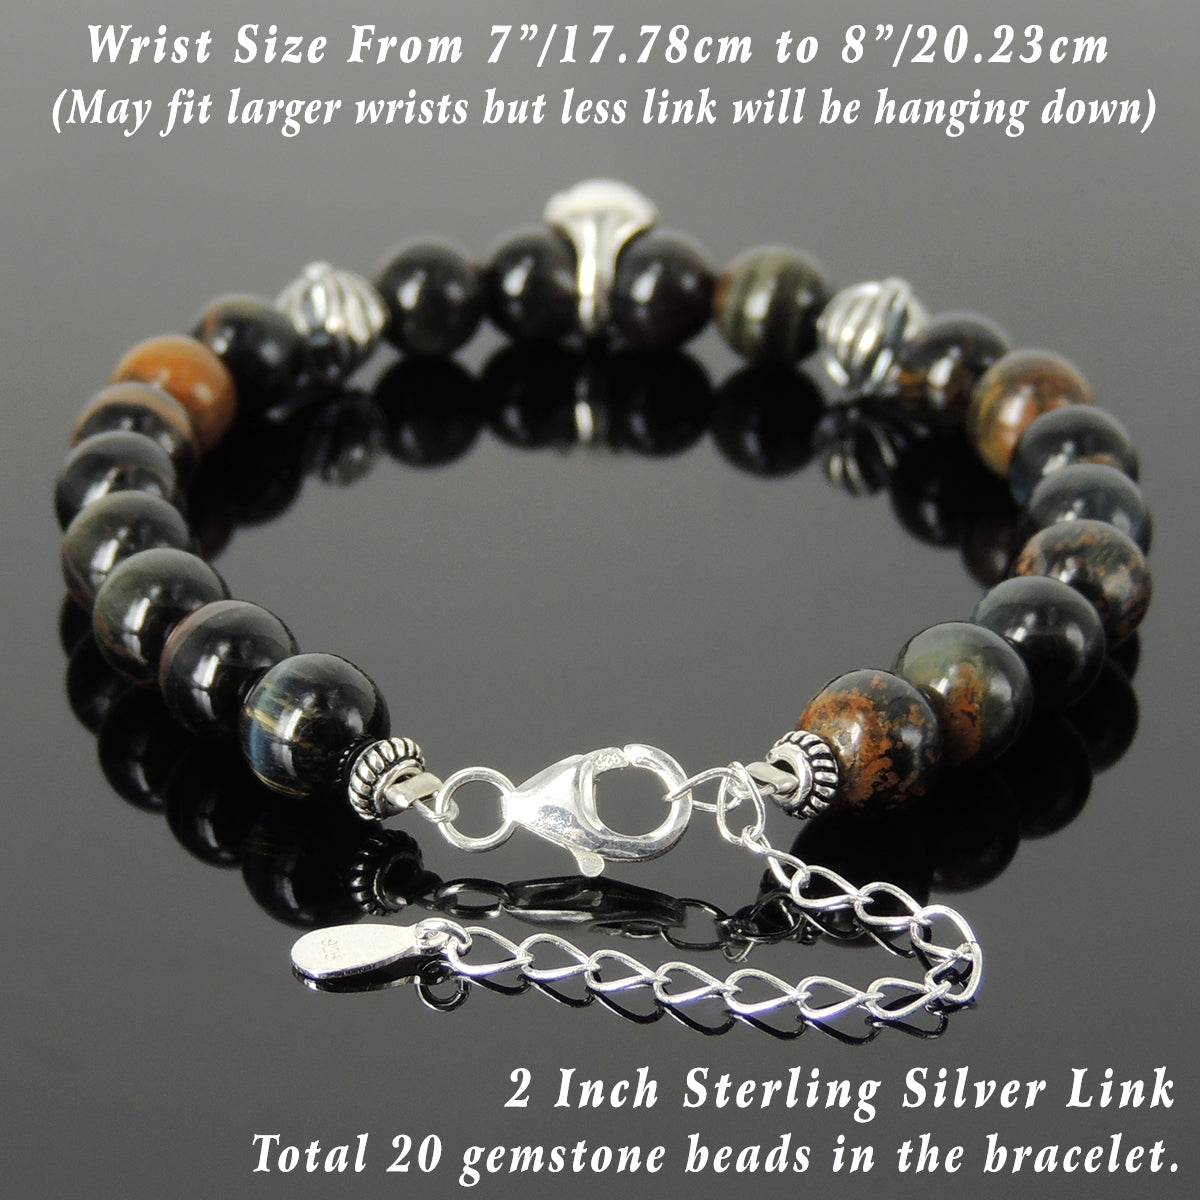 Handmade Spiritual Skull & Cross Clasp Bracelet with Healing 8mm Rare Mixed Blue Tiger Eye Gemstones with Genuine S925 Sterling Silver Parts - BR1471